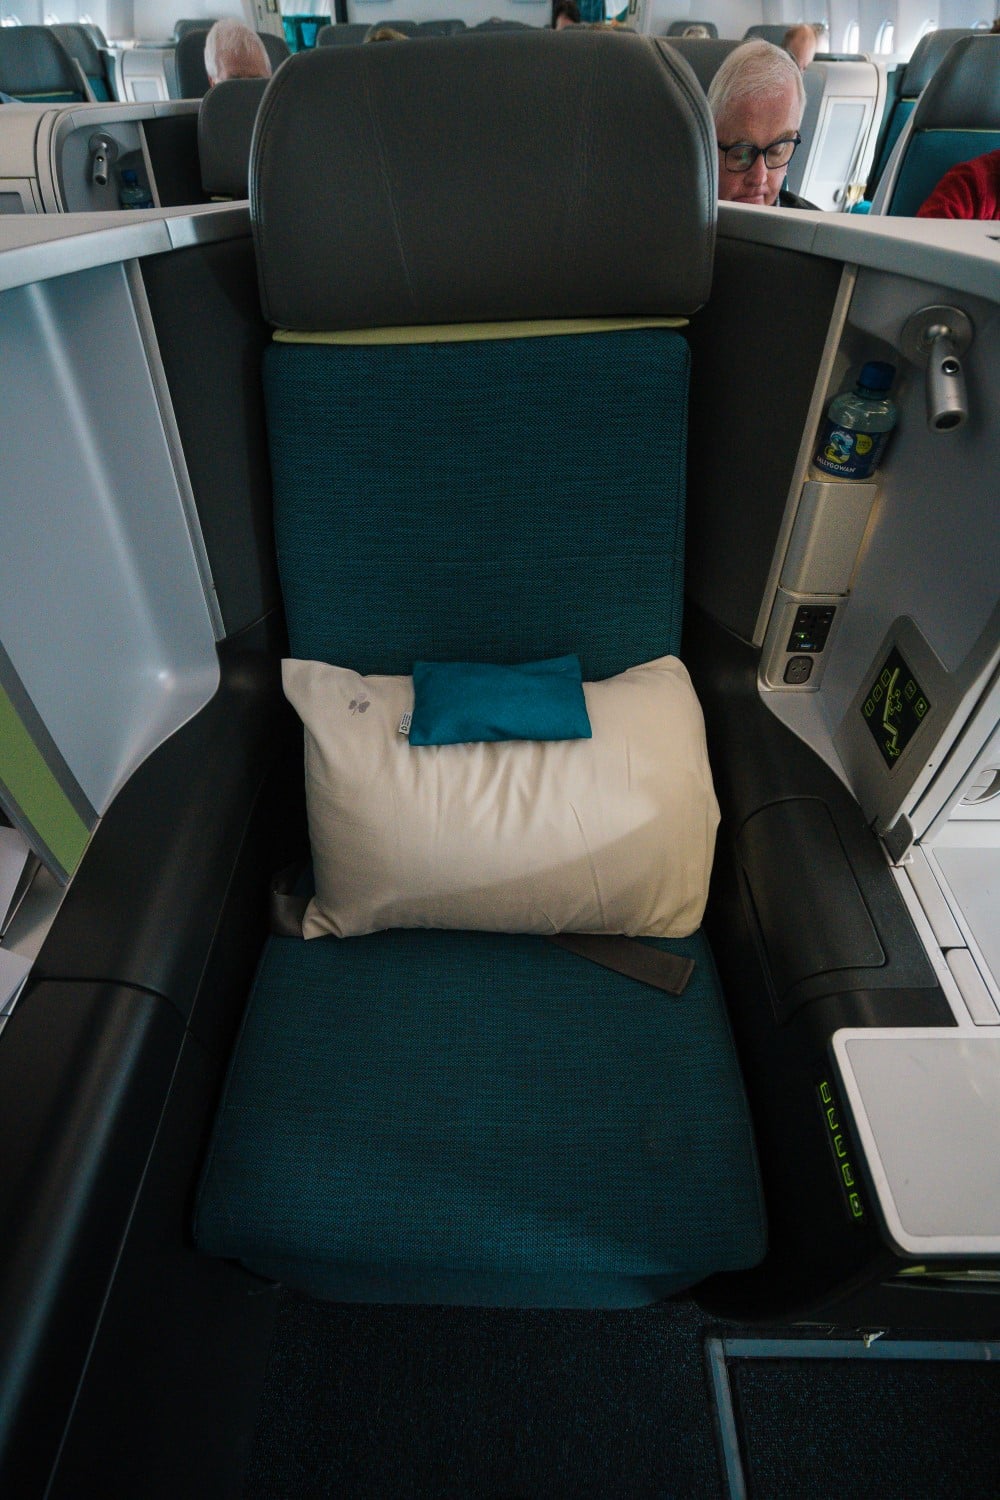 Front facing view of the seat on Aer Lingus business class in A330-200.